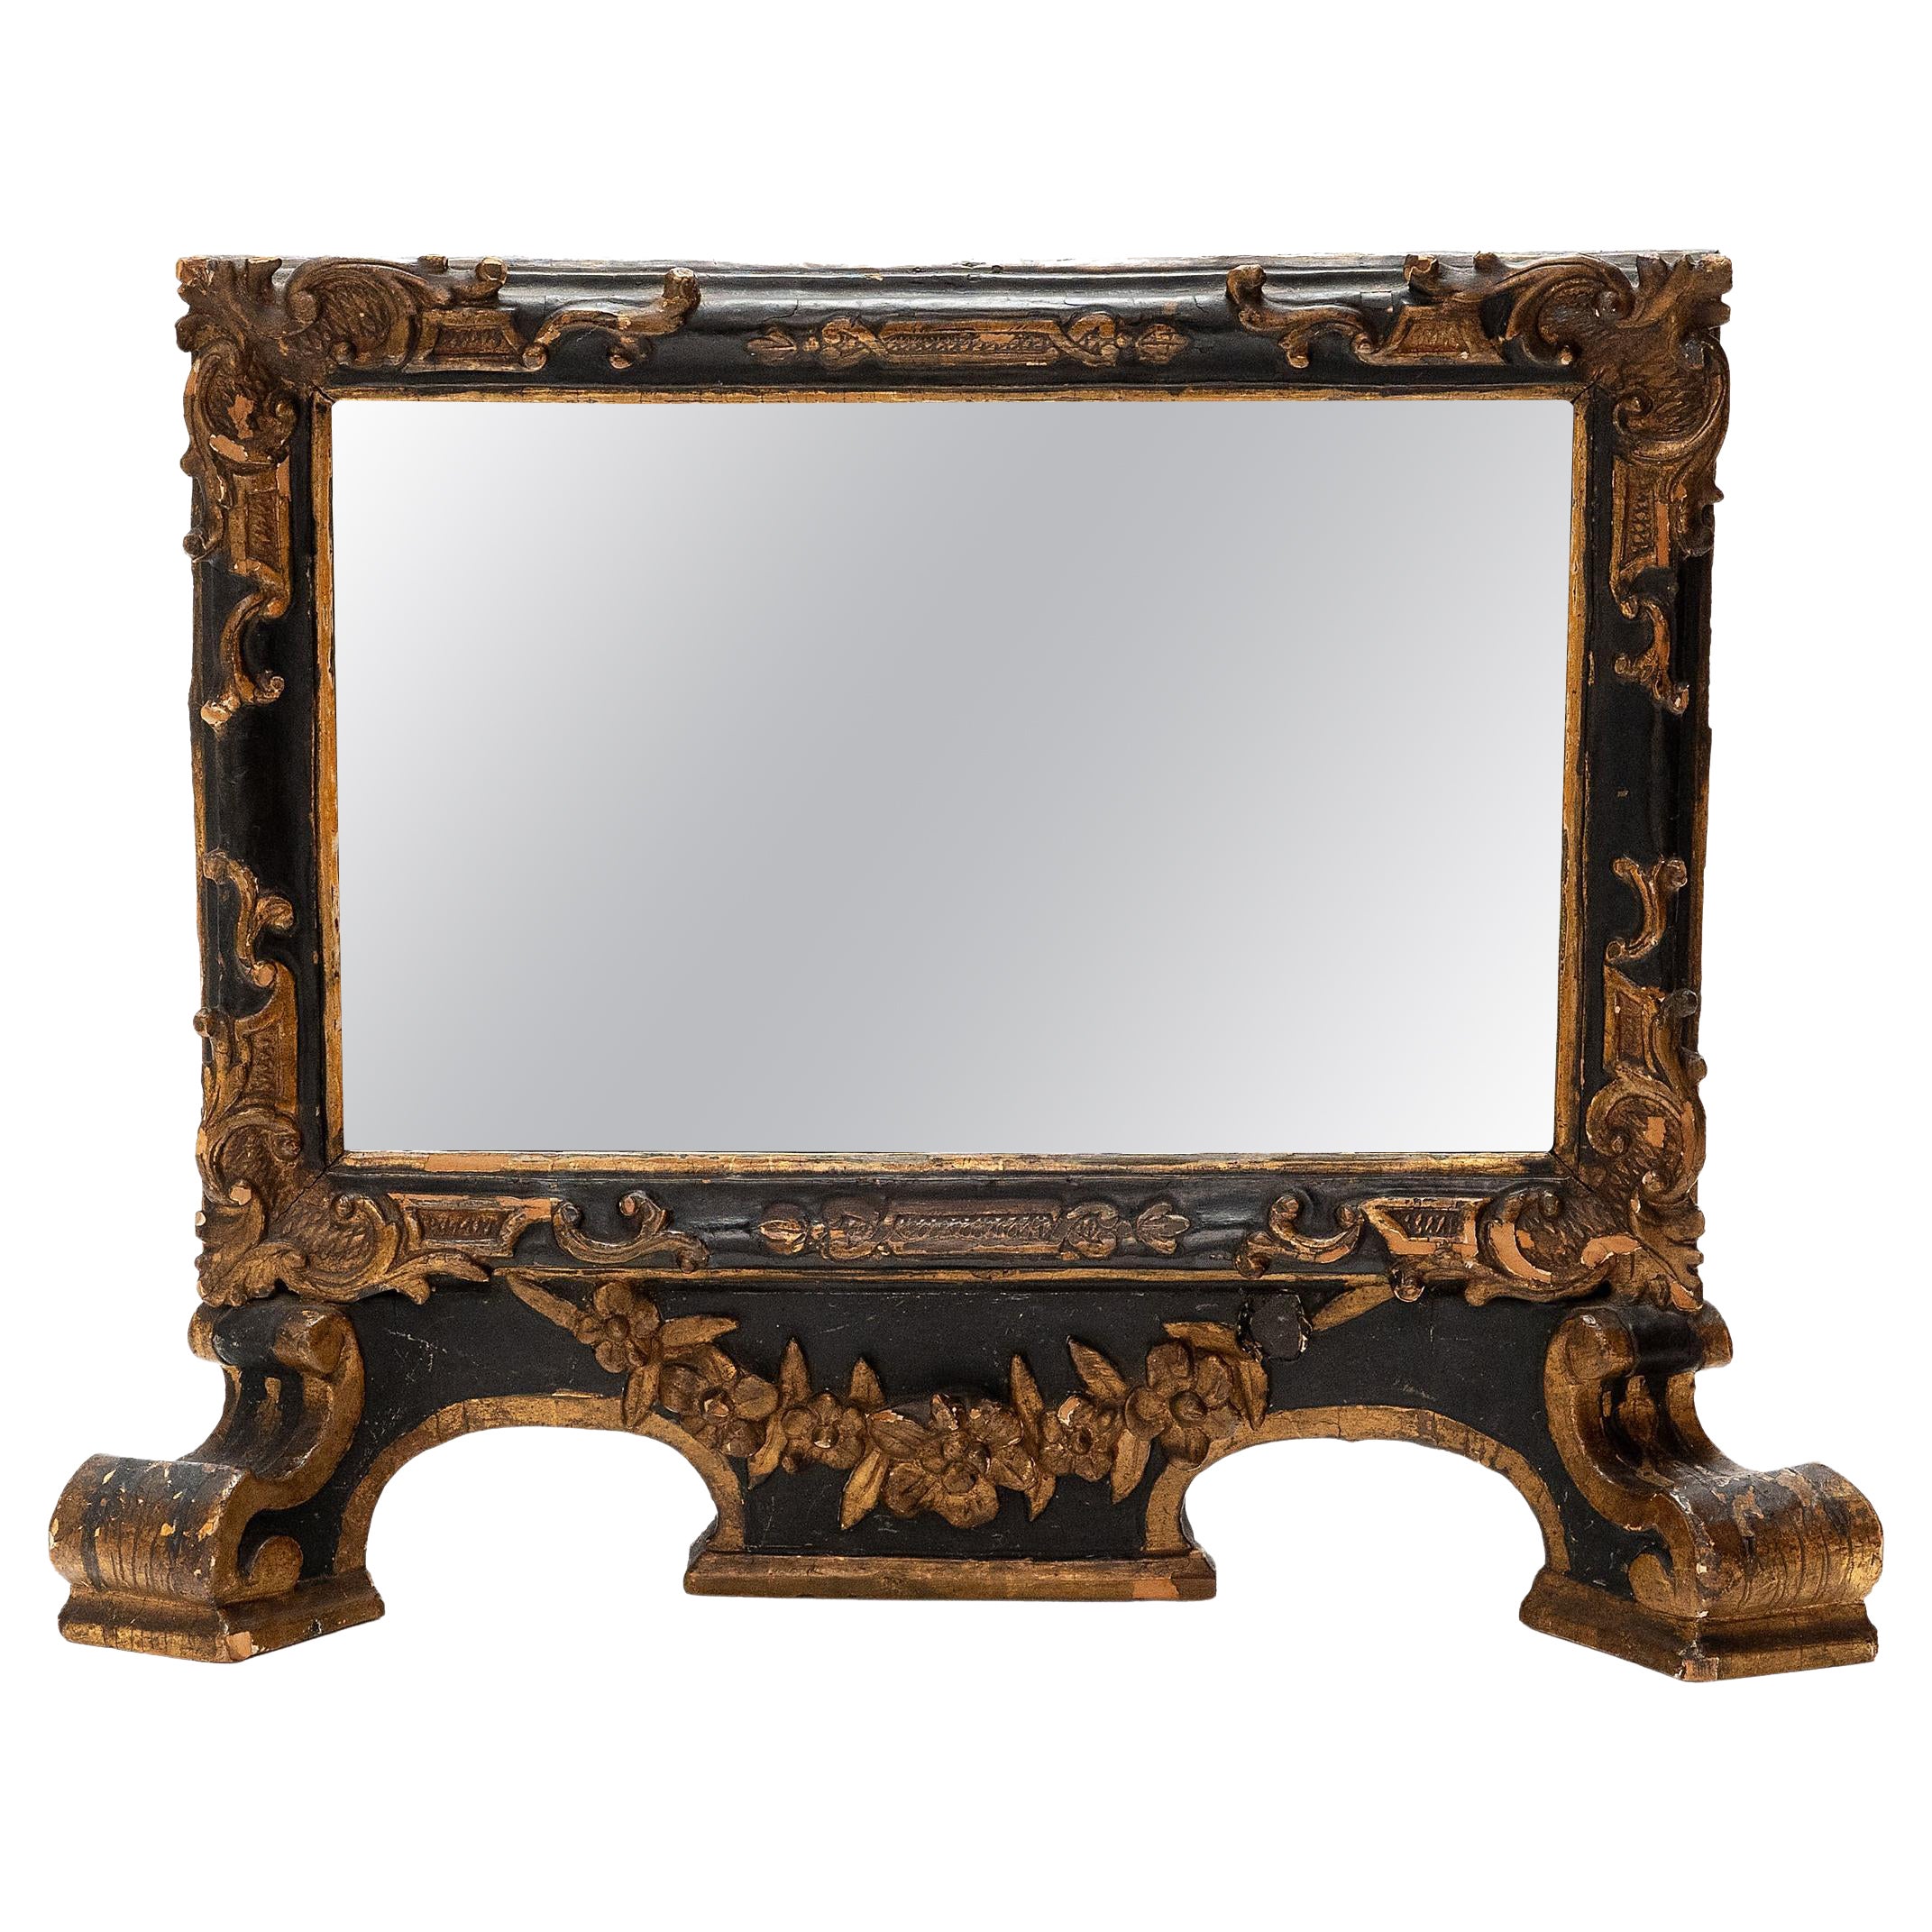 Chinese Gilt Table Mirror, c. 1900